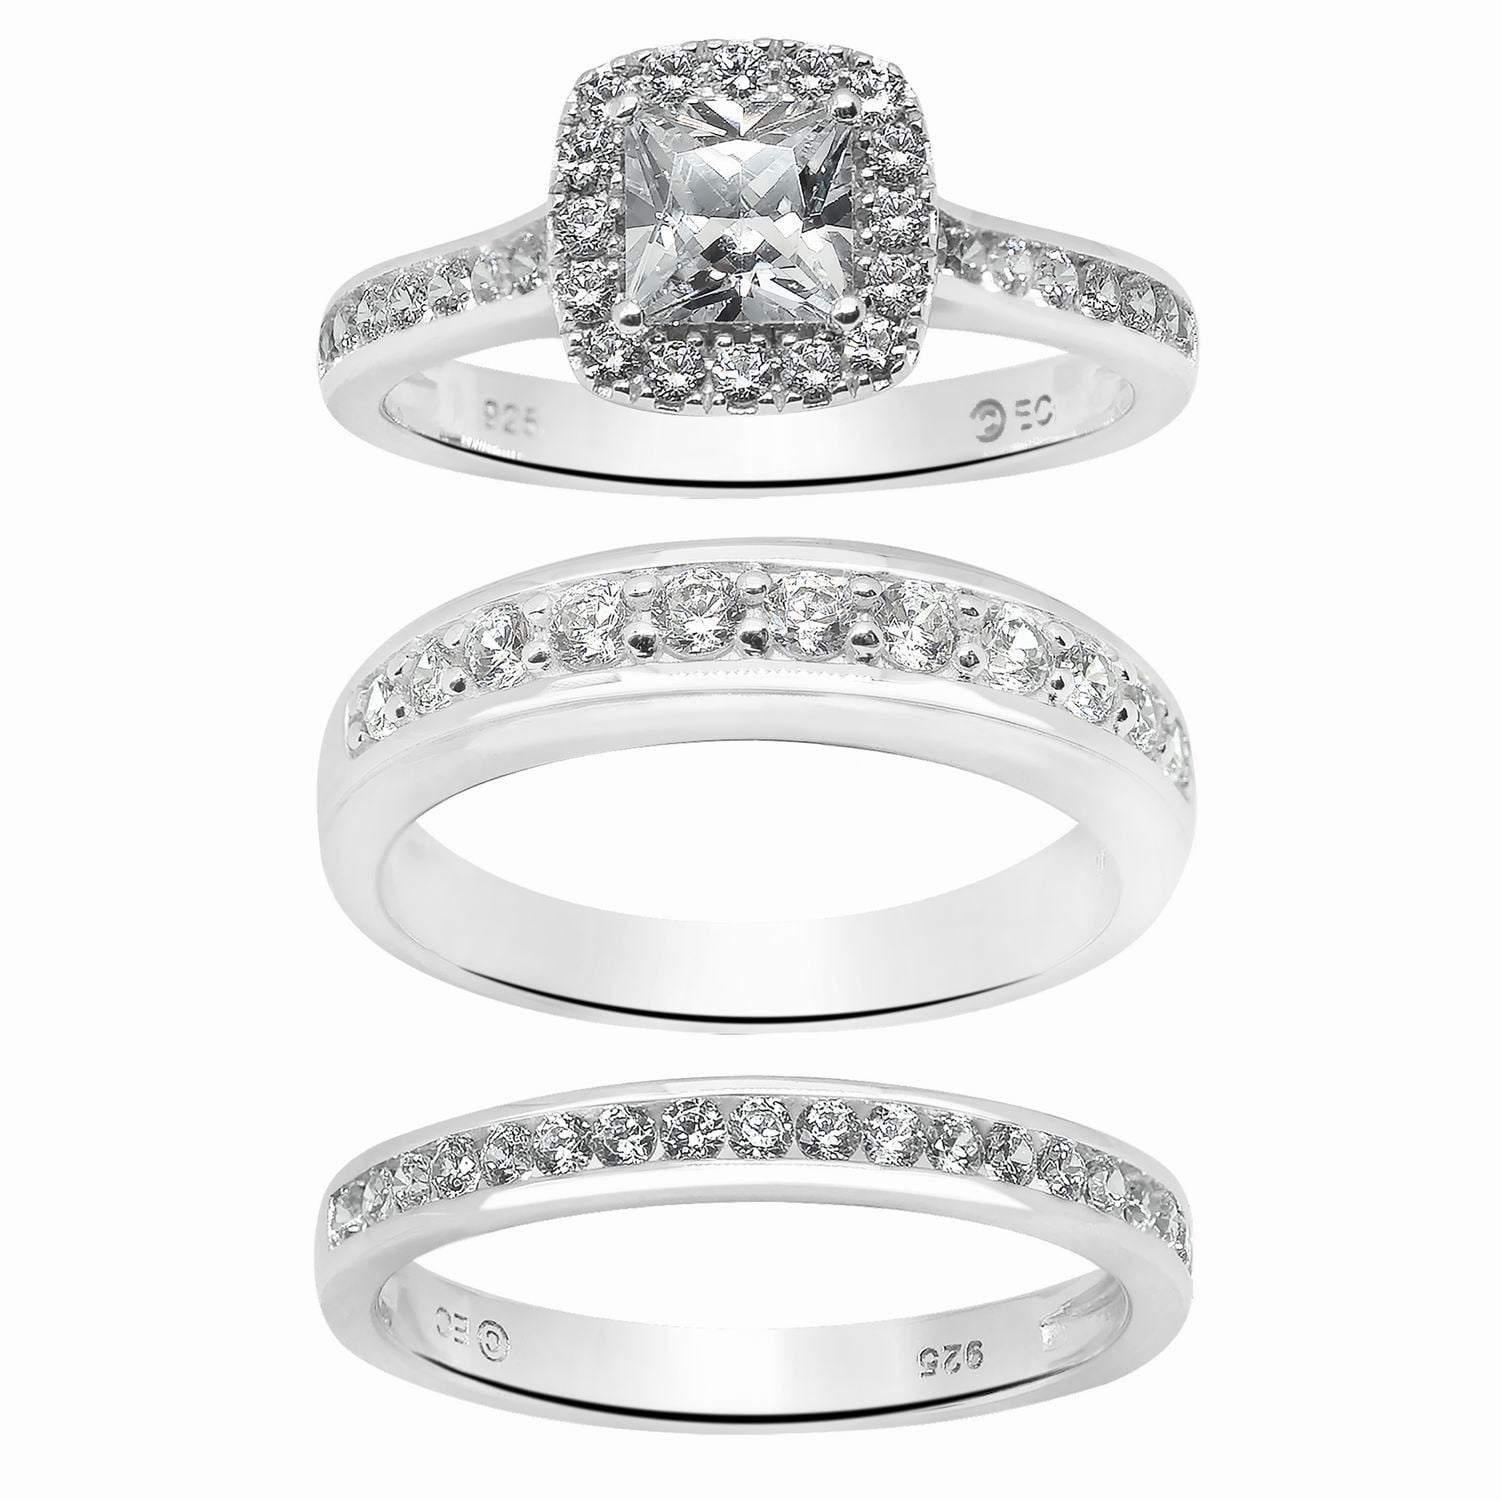 TVS-JEWELS Round Cut Simulated Diamond Women's Solitaire with Accents Wedding Ring Size 5 to 12